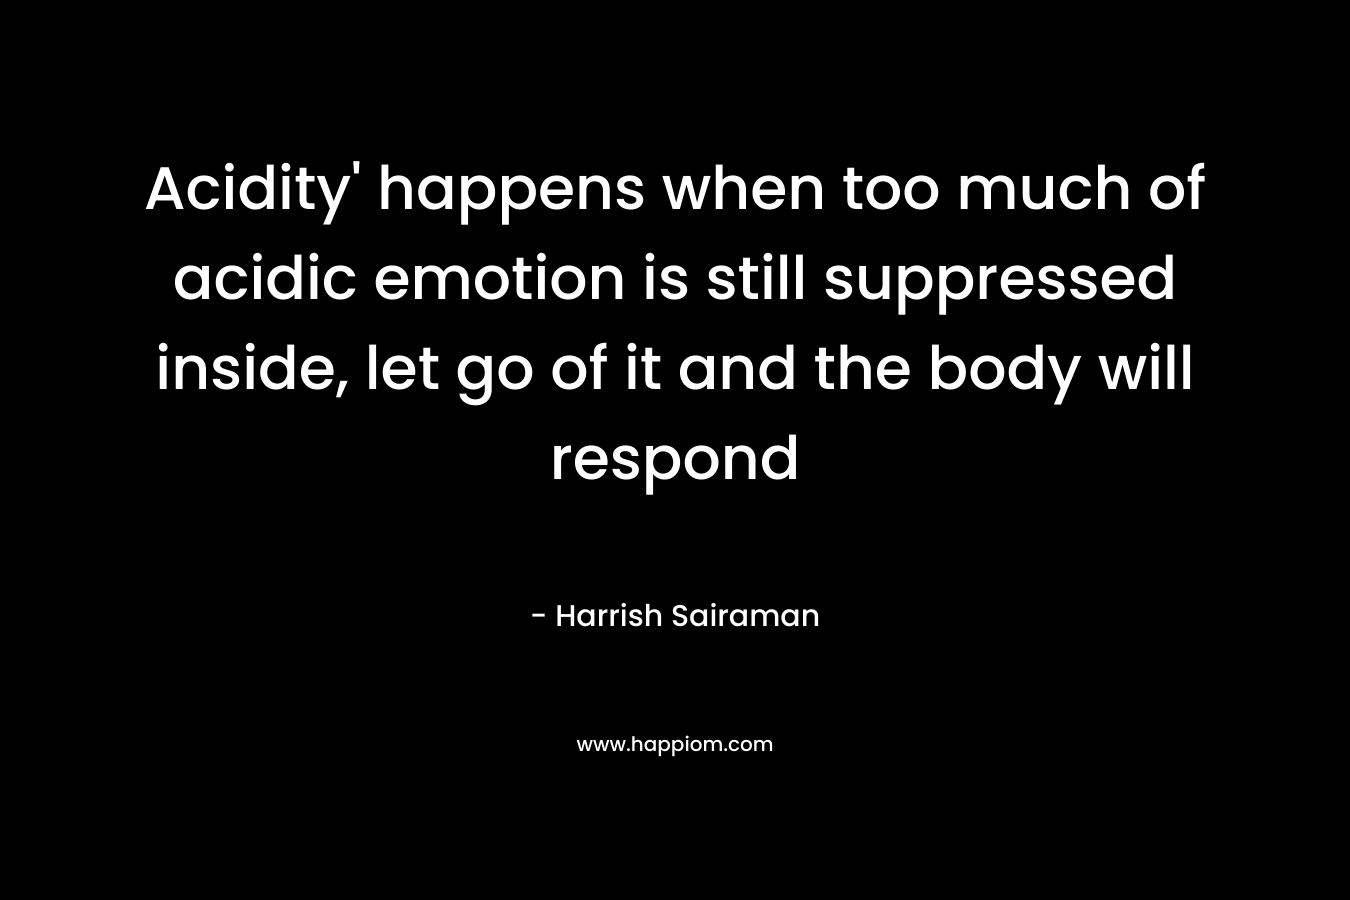 Acidity’ happens when too much of acidic emotion is still suppressed inside, let go of it and the body will respond – Harrish Sairaman